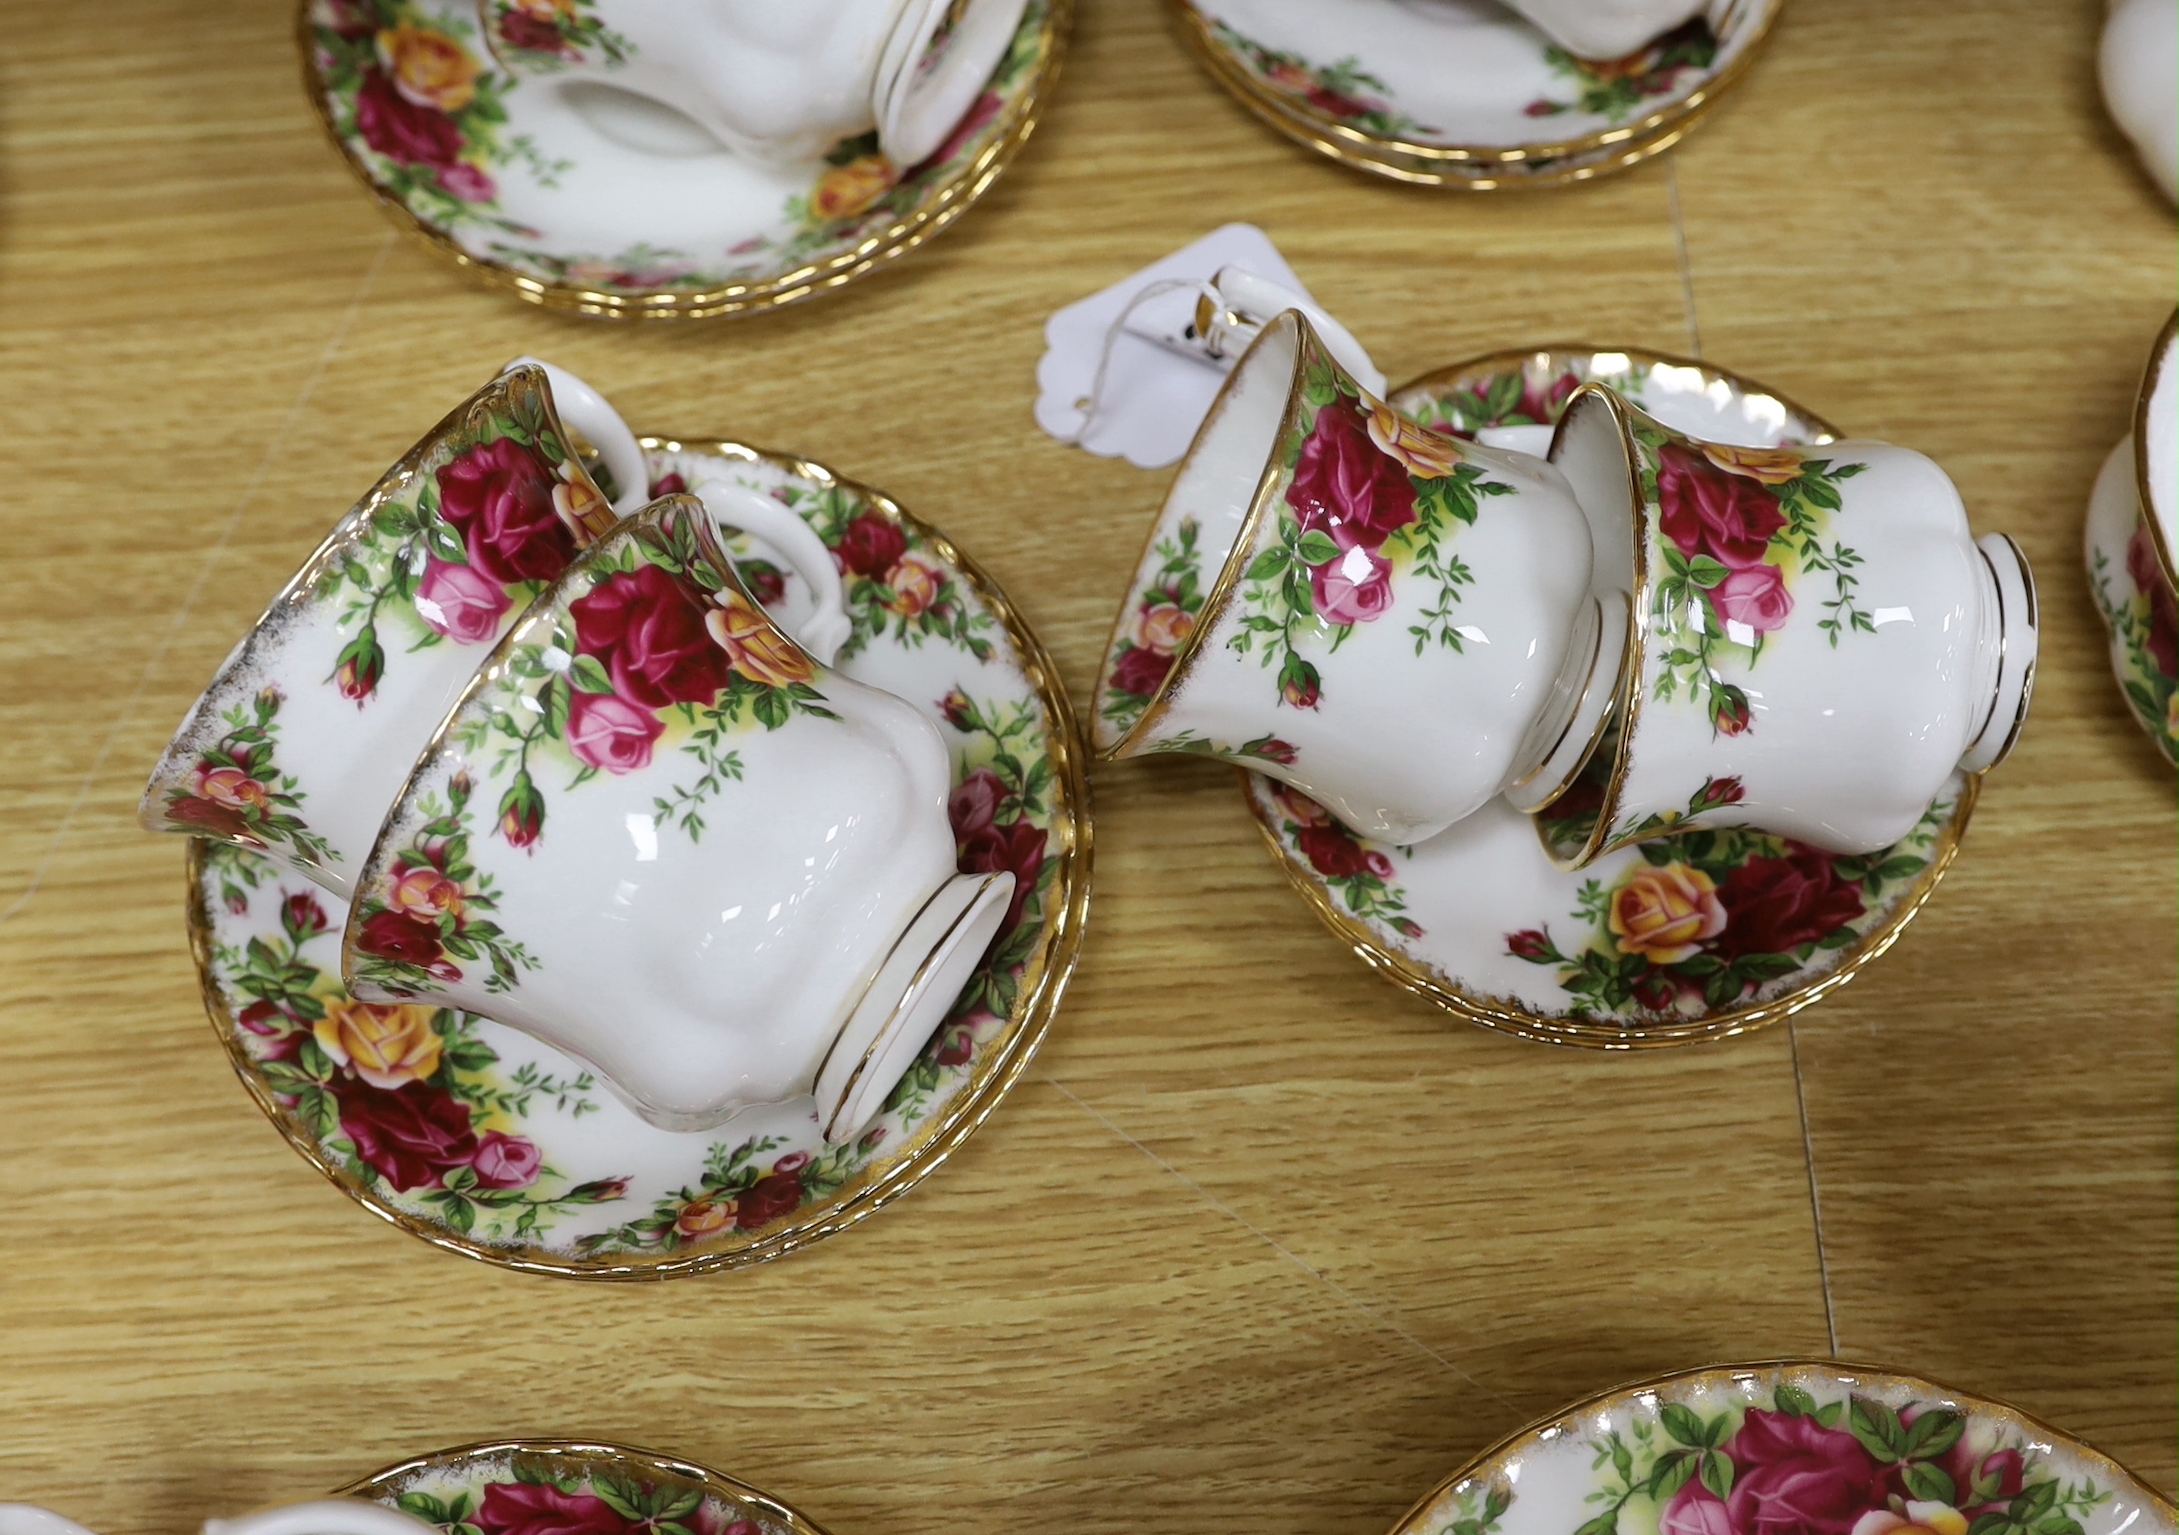 A Royal Albert Old Country Rose dinner service and tea service including trios, tureens and oval dishes